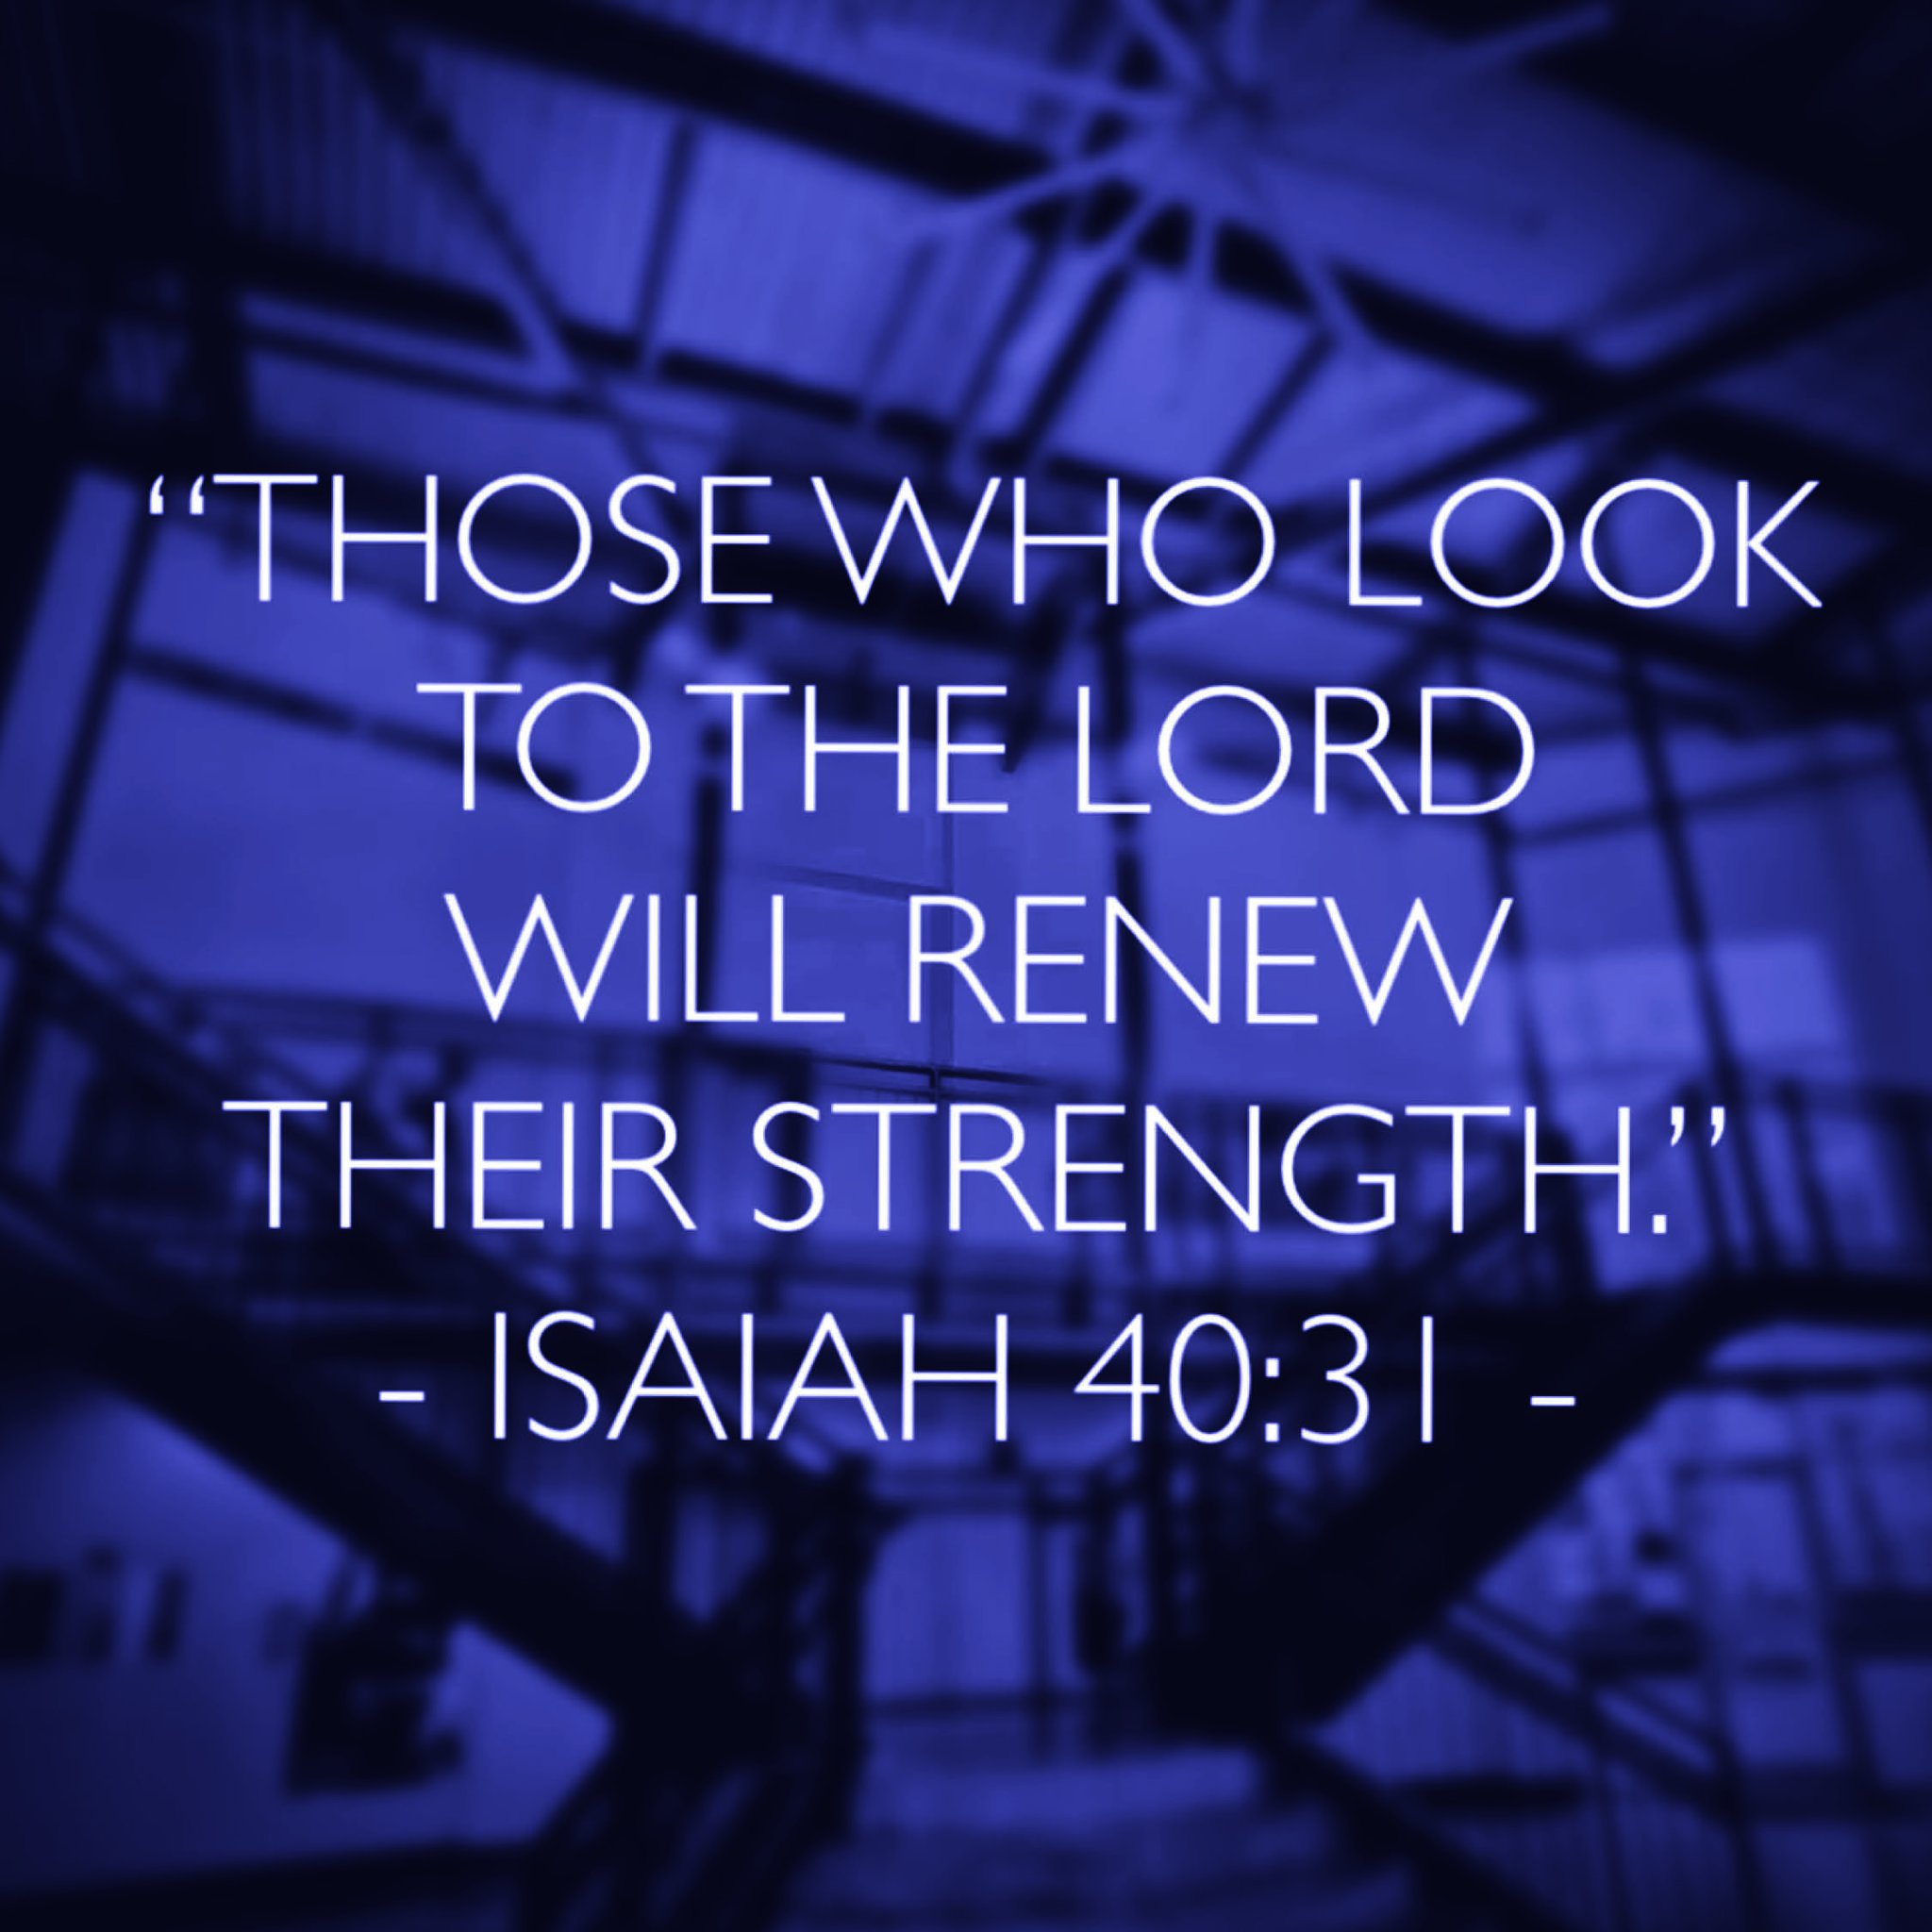 'THOSE WHO LOOK TOTHE LORD WILL RENEW THEIR STRENGTH" ISAIAH 40.3 1